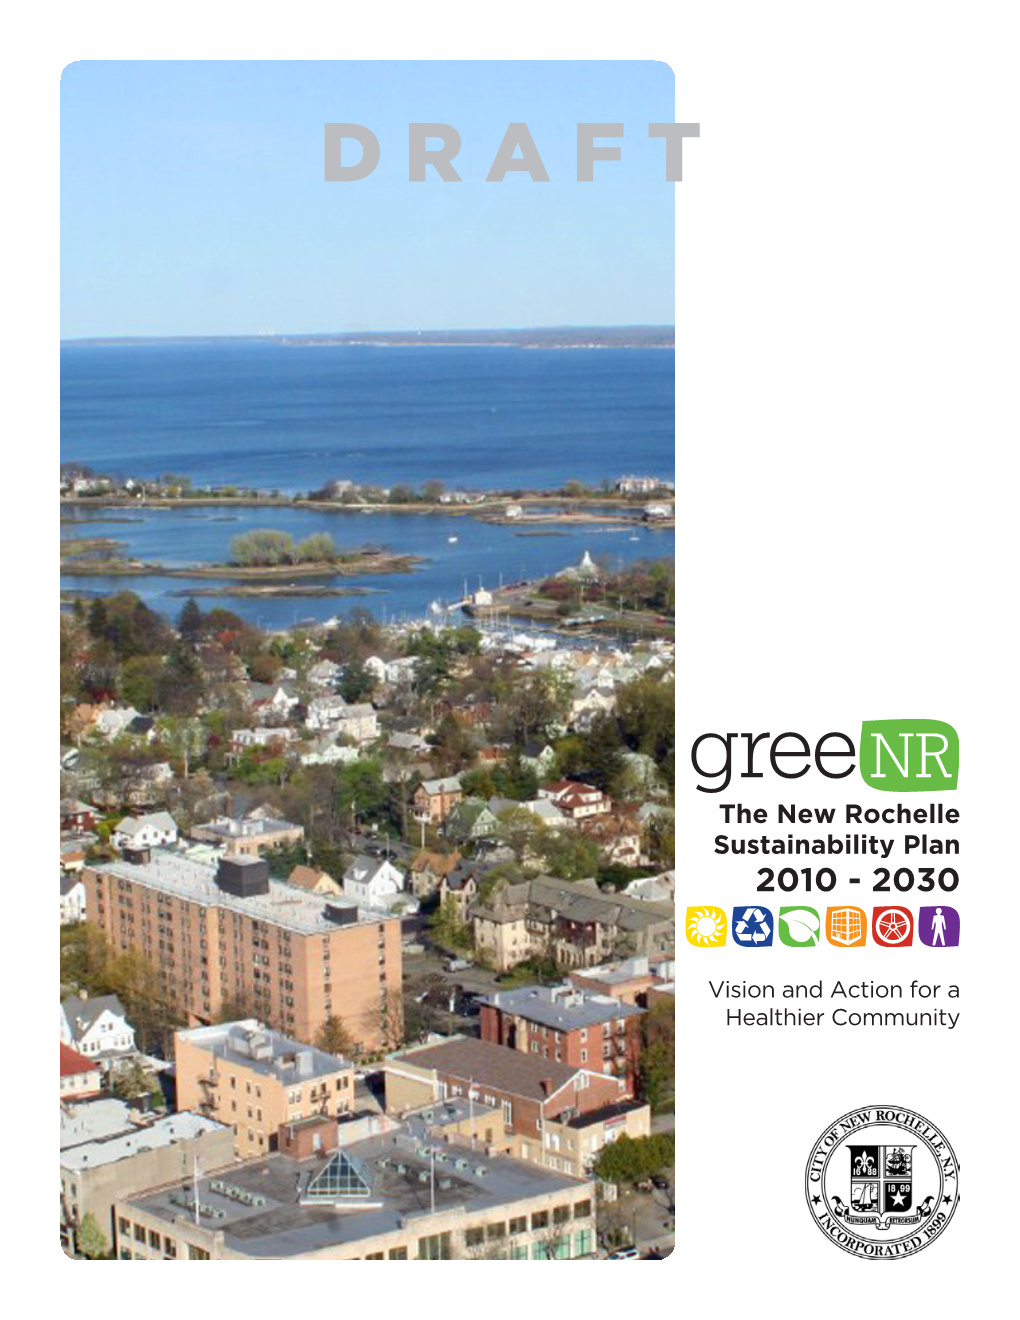 The New Rochelle Sustainability Plan 2010 - 2030